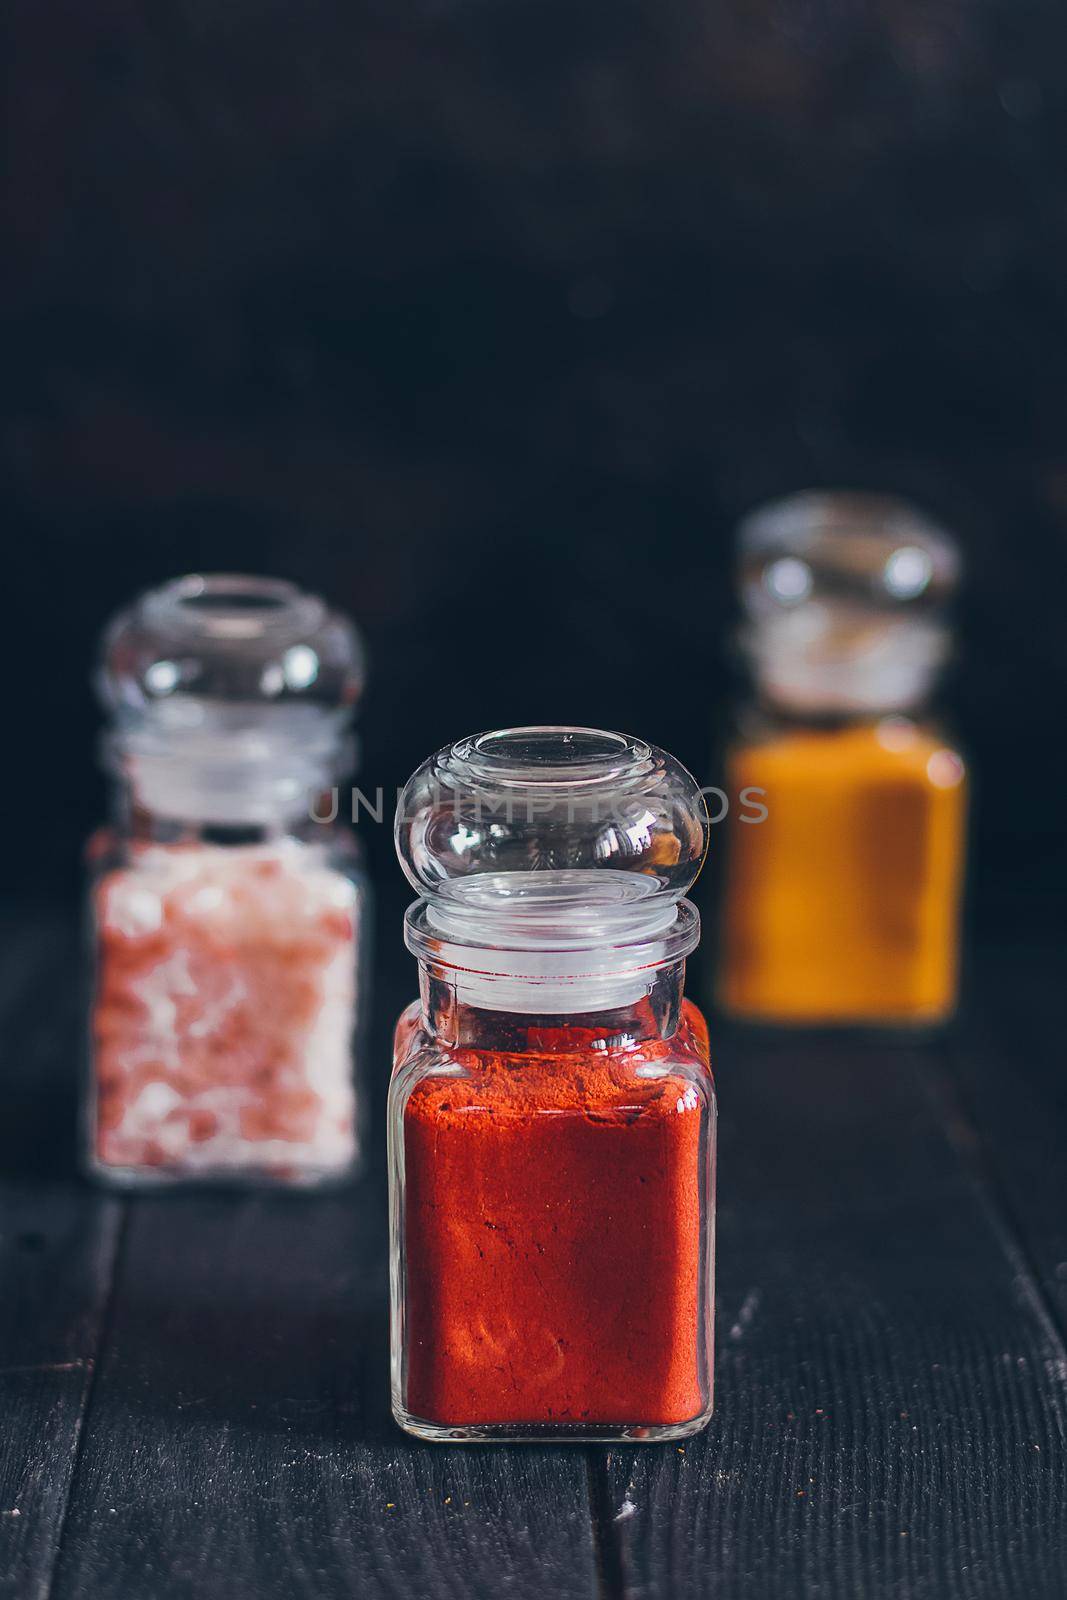 Bright aromatic spices in glass jars, assortments of spices: pink salt, paprika and turmeric on black stone background